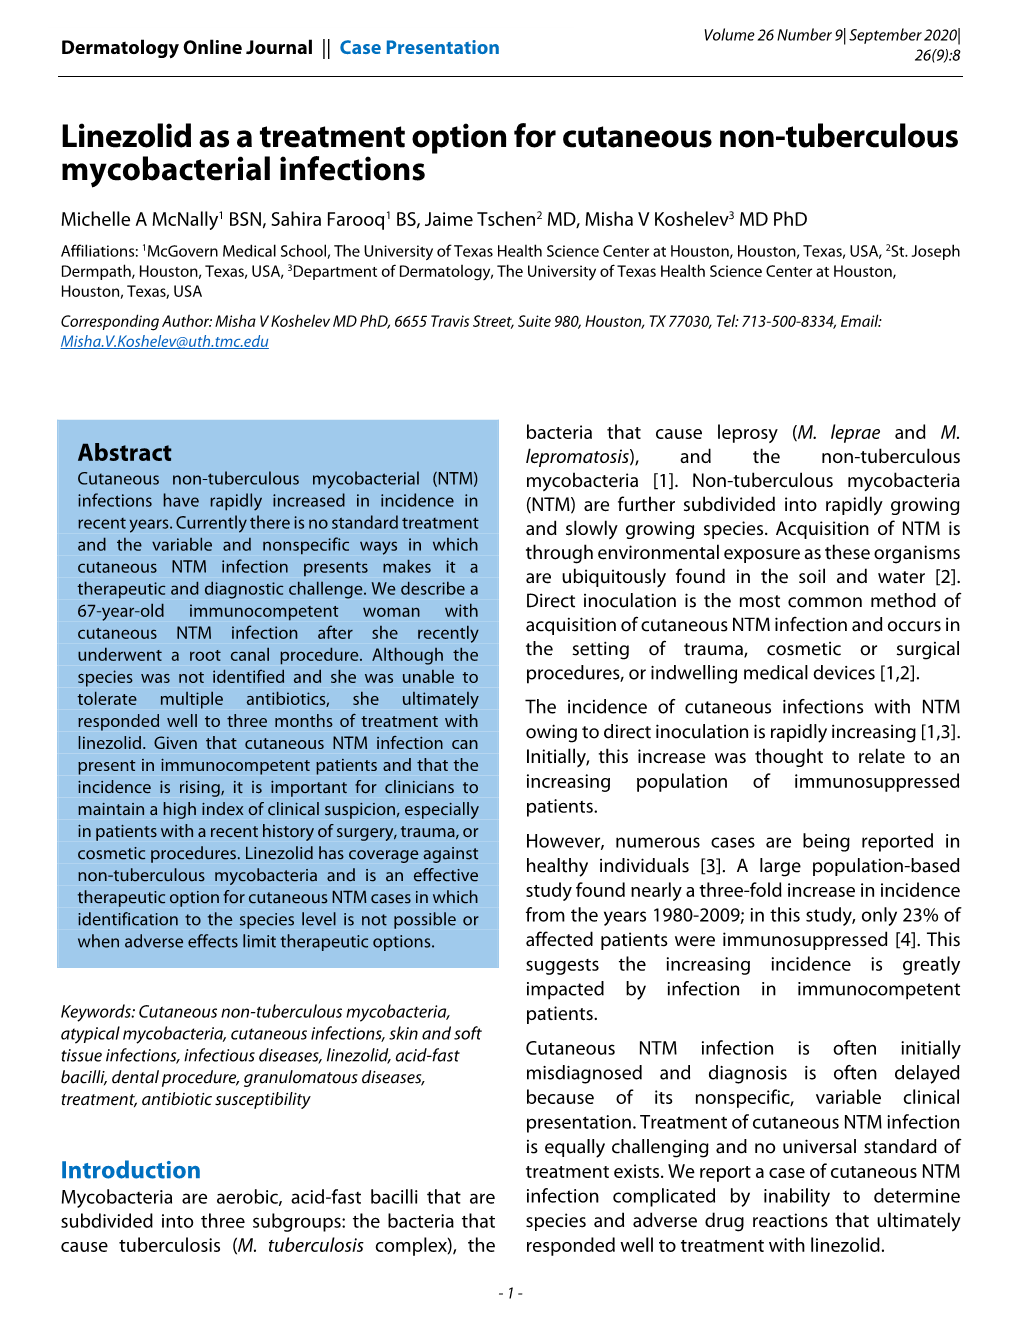 Linezolid As a Treatment Option for Cutaneous Non-Tuberculous Mycobacterial Infections